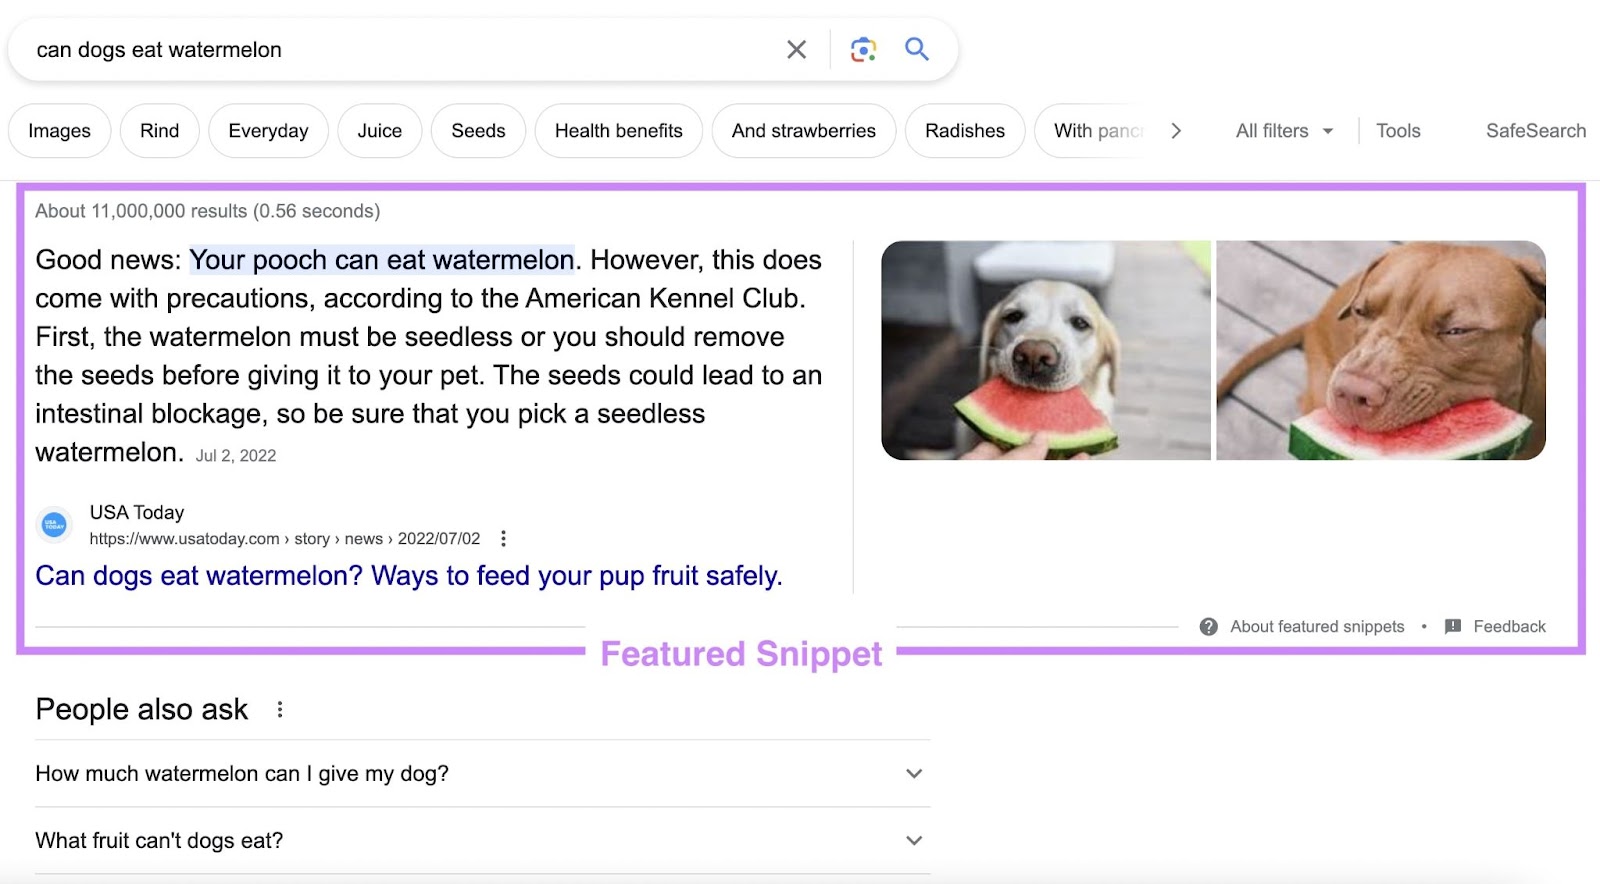 A featured snippet for “can dogs eat watermelon” query